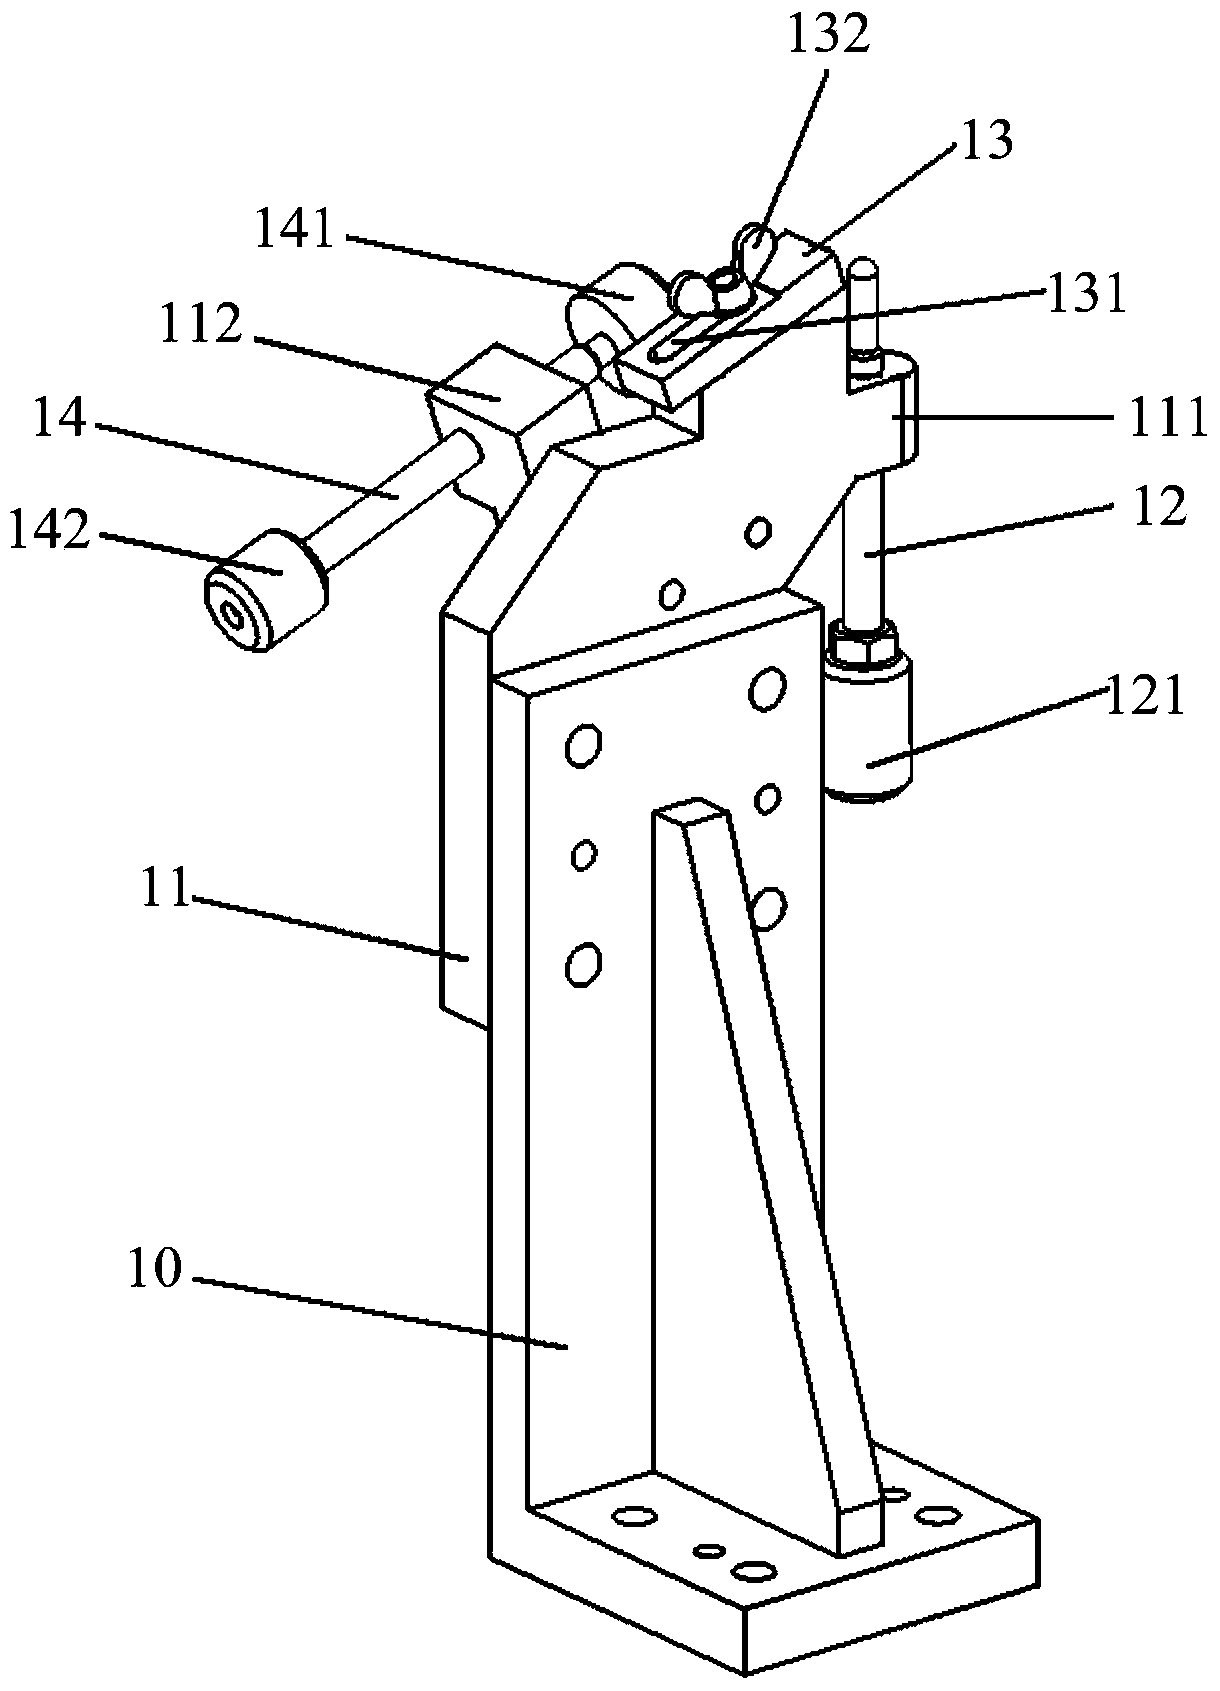 Gauge positioning and clamping device